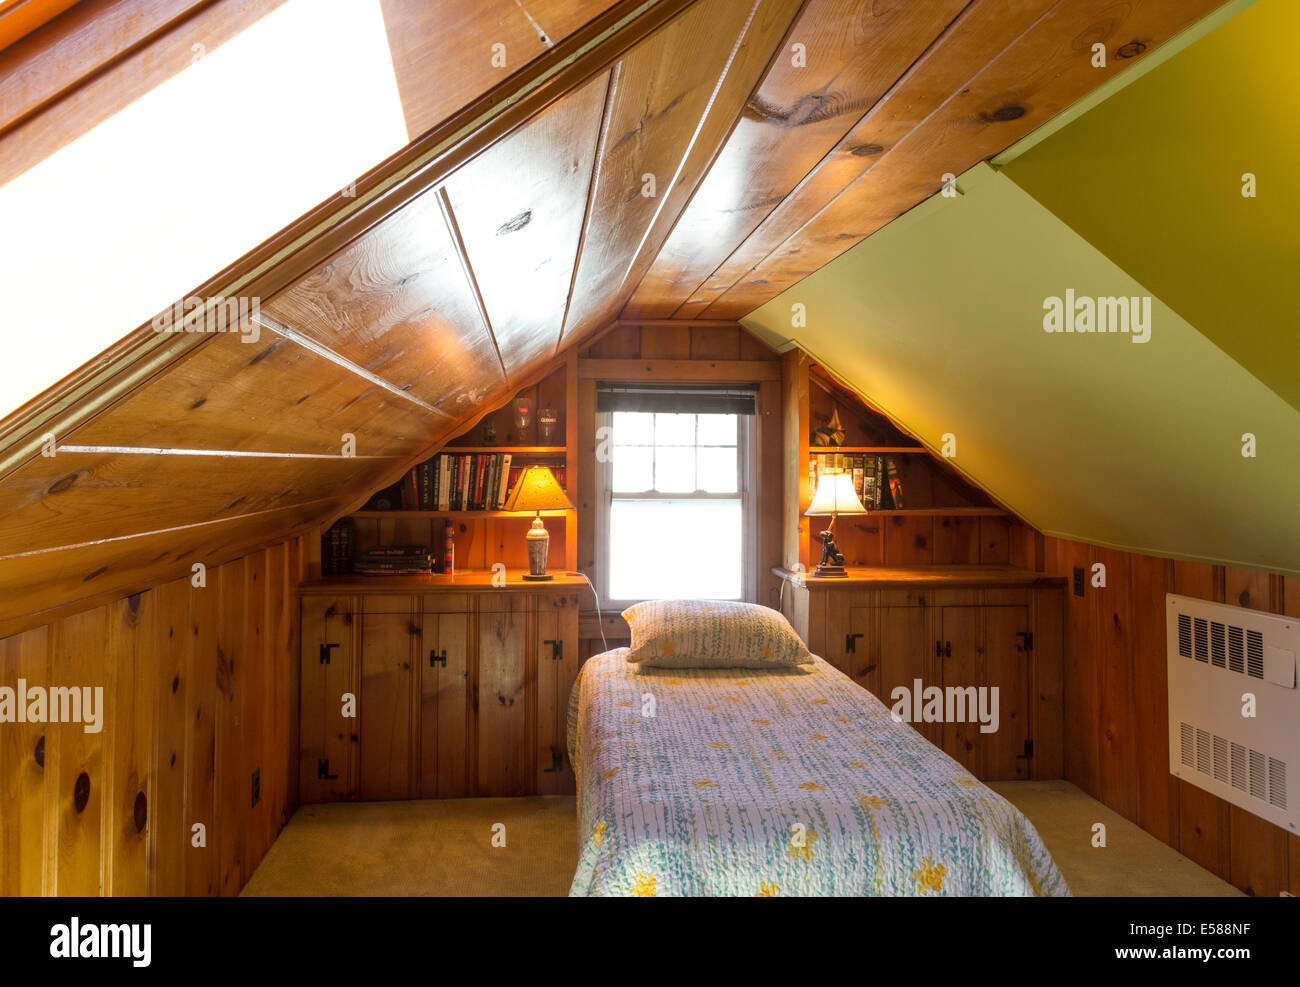 Wood Paneled Attic Bedroom with Slanted Ceiling,  Single Bed, Interior, Residential House, USA Stock Photo